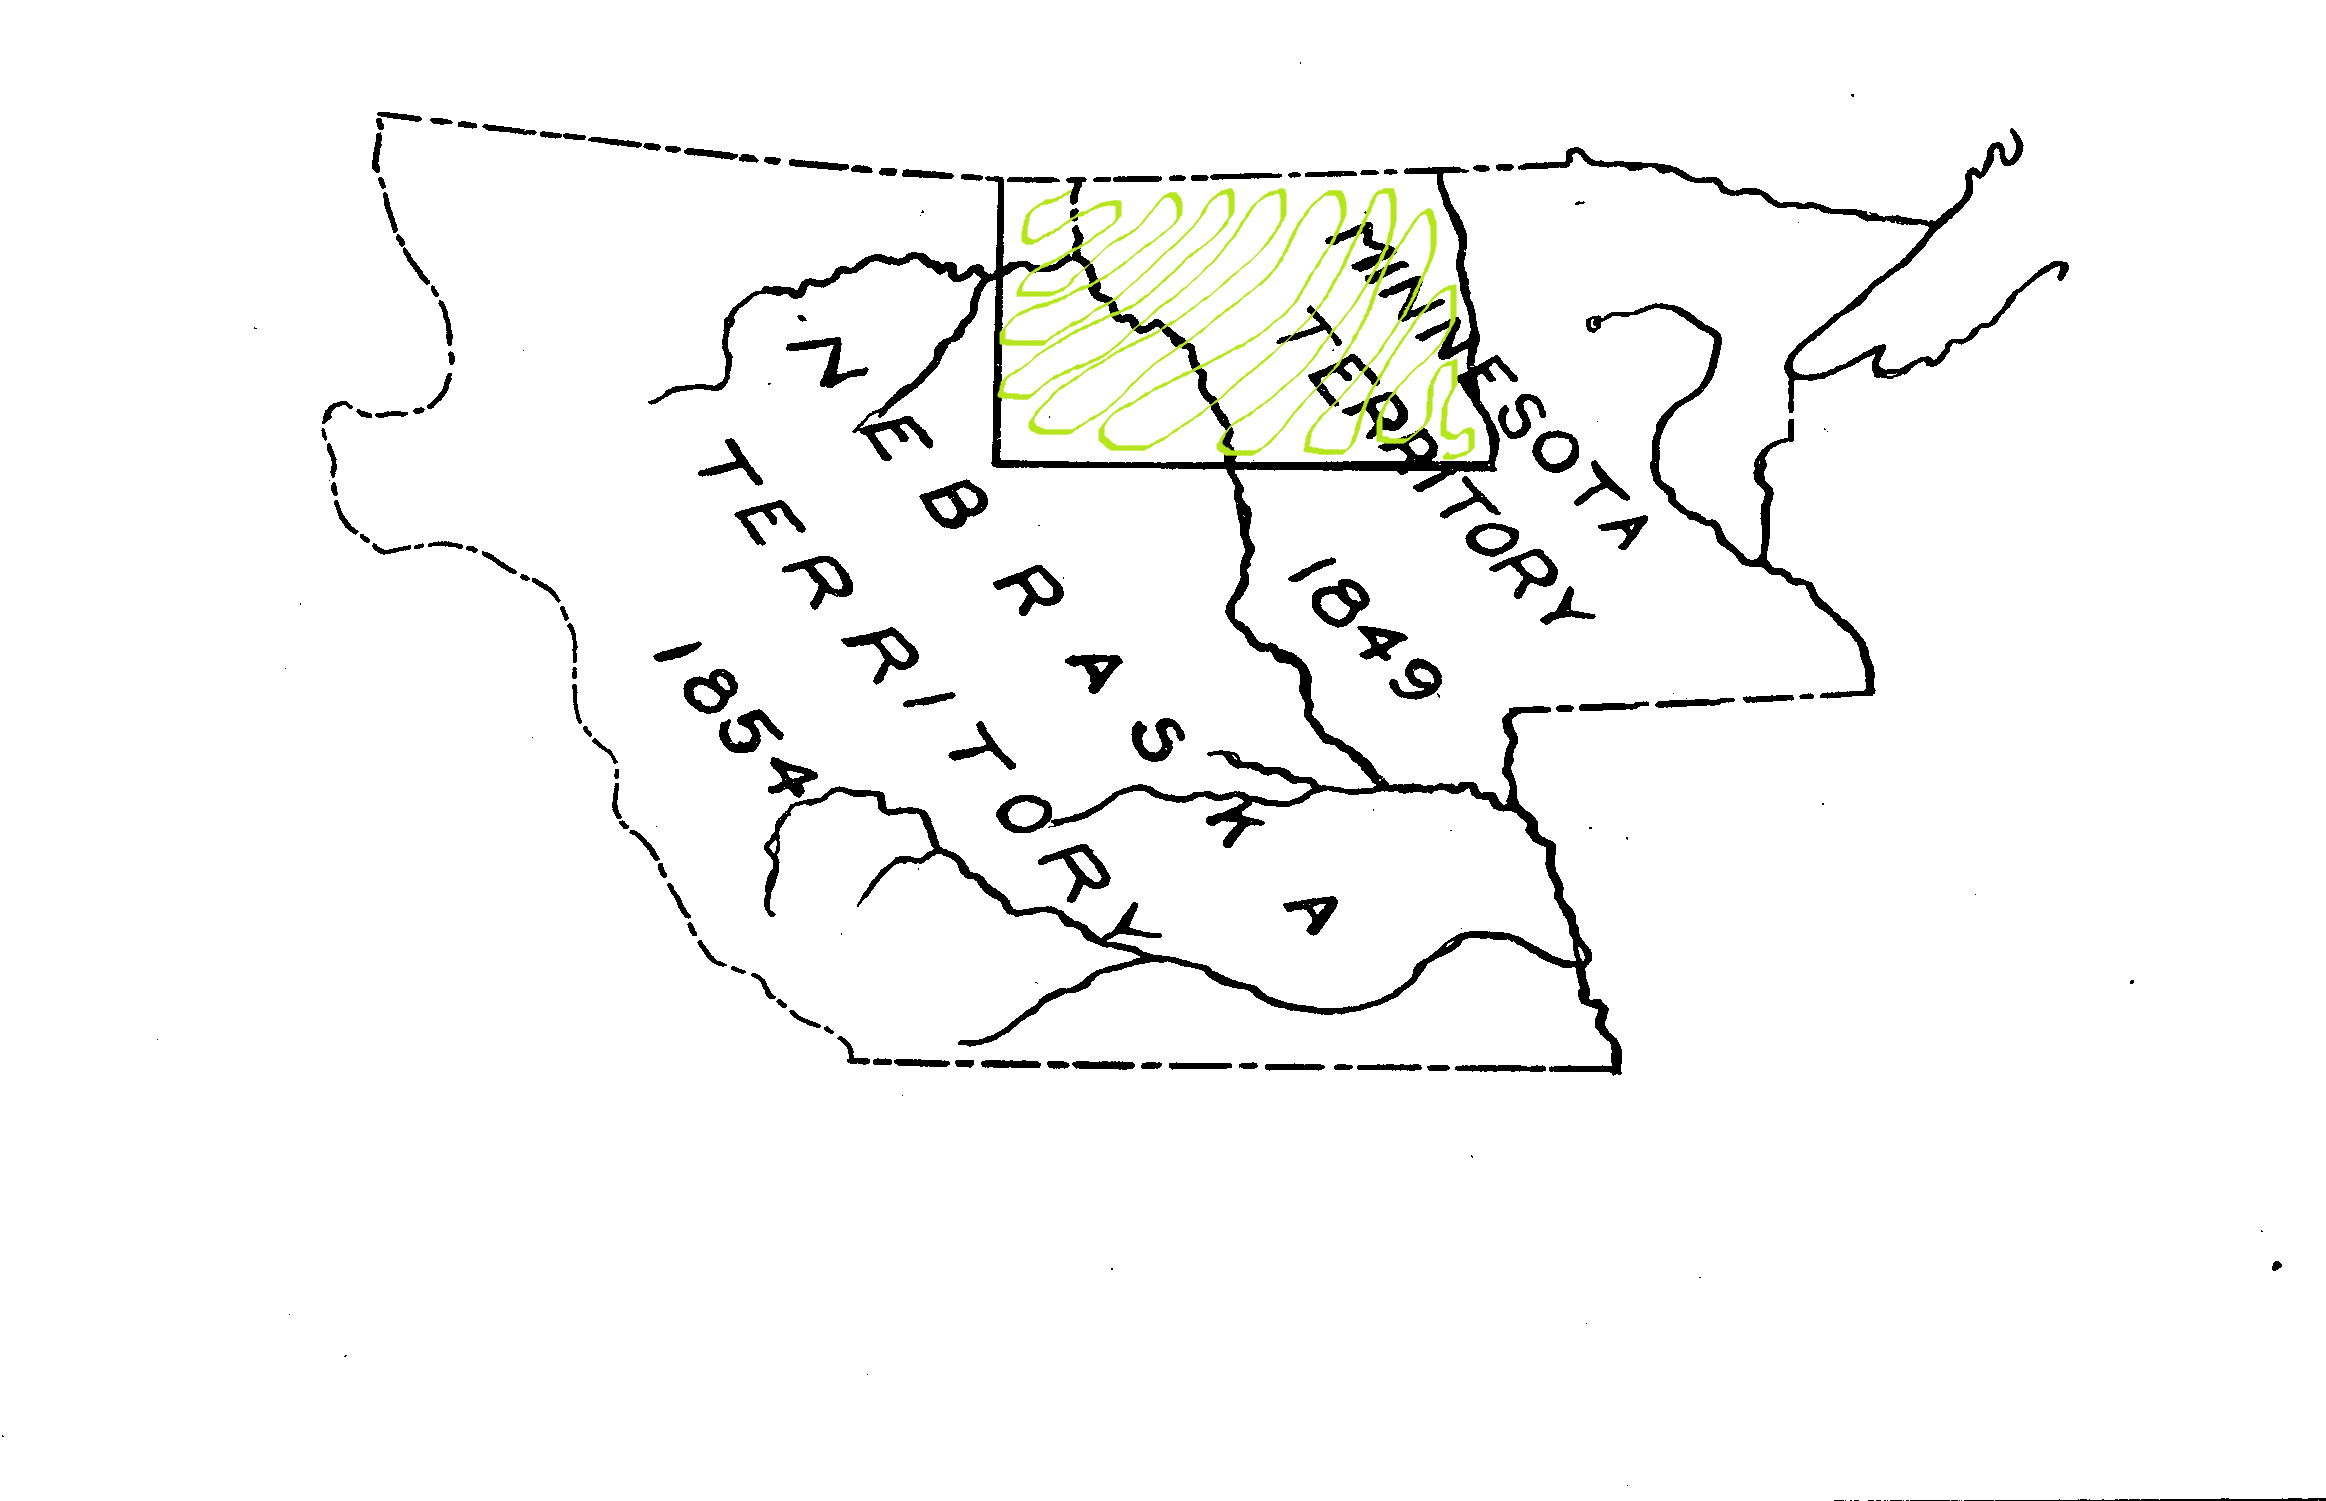 In 1854, the western portion of North Dakota (west of the Missouri River) was given to Nebraska Territory.